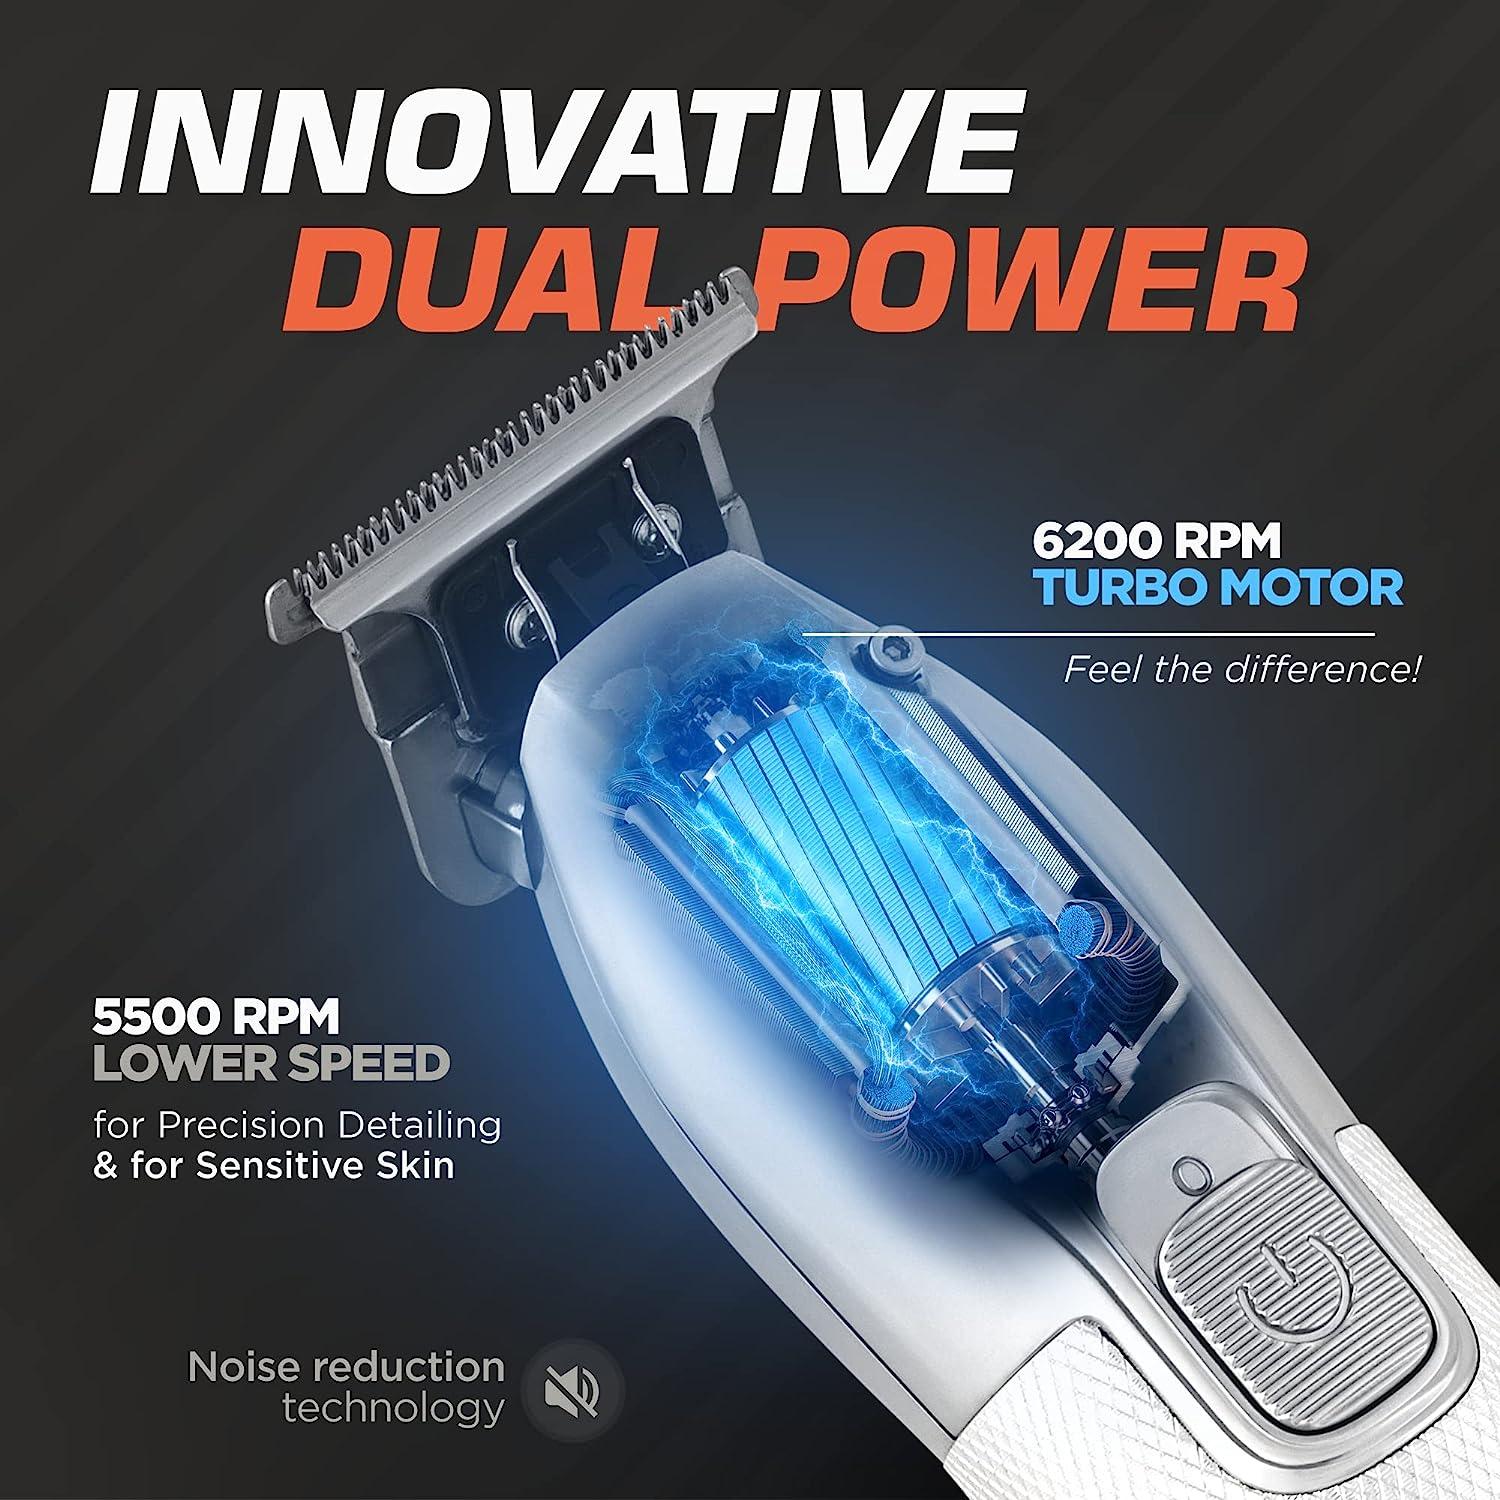 Cabello, Set, Kit Hair Cutting, Cutting, for with Haircut Men Professional de Clippers Hair Turbo Barber Precise Maquina and Set Power Clippers Barber for Hair Trimmers Cortar Clippers Fagaci Cordless